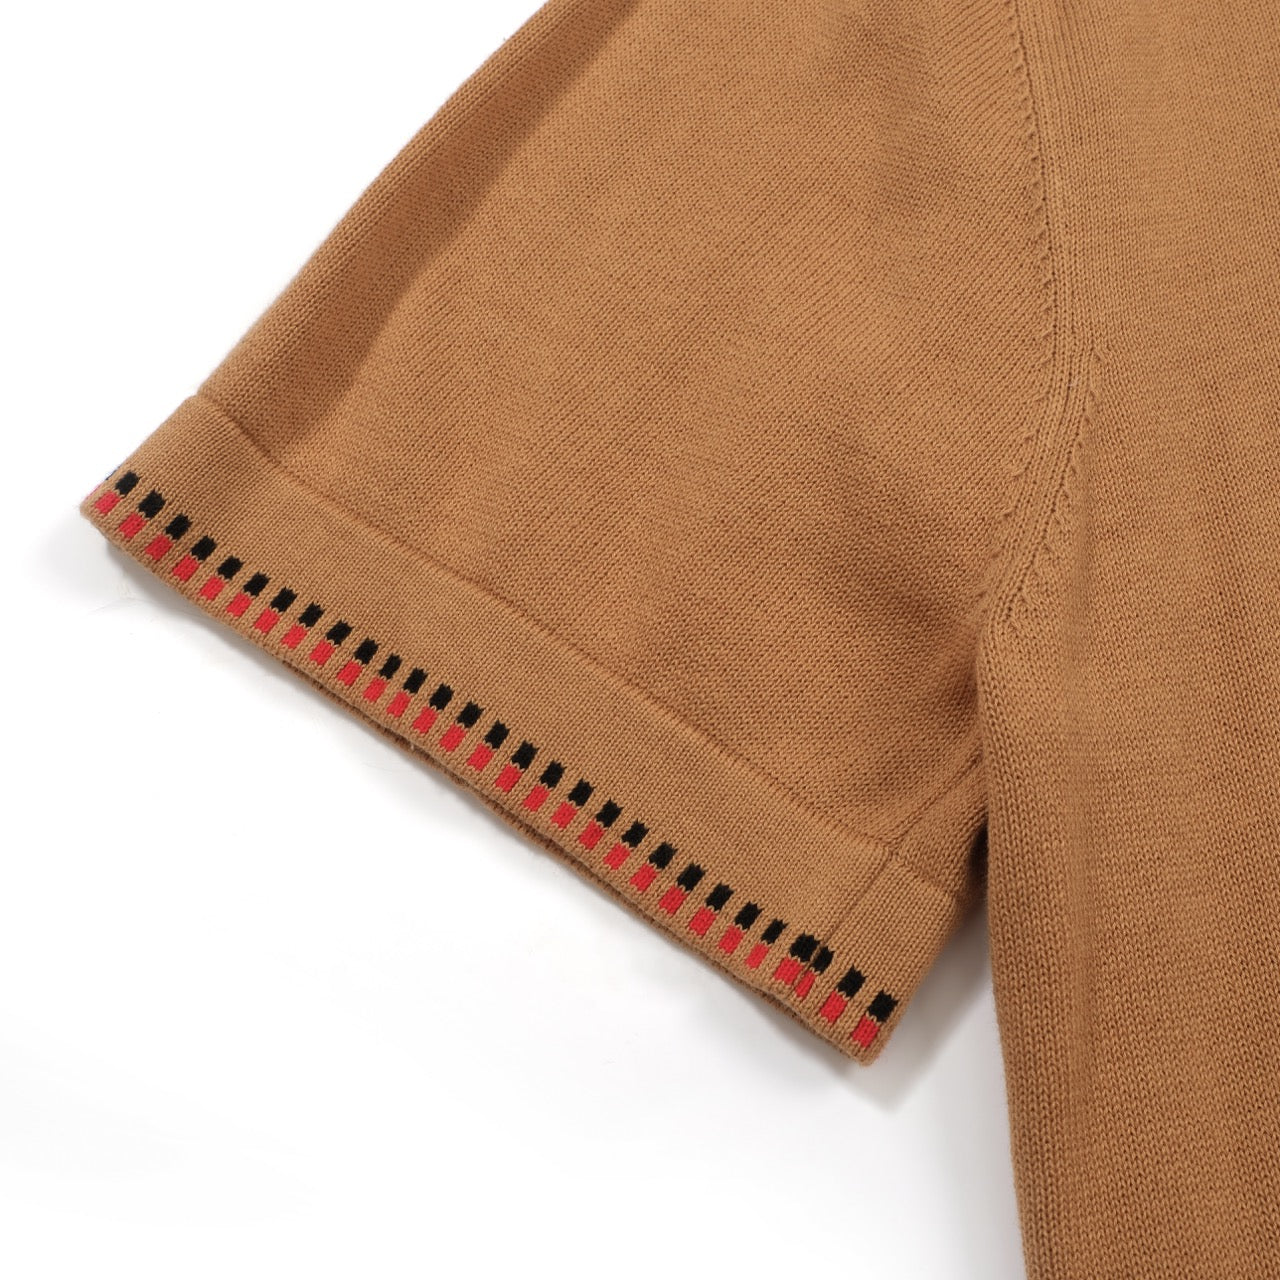 OXKNIT Men Vintage Clothing 1960s Mod Style Casual Light Brown Crawdaddy Knit Retro Polo